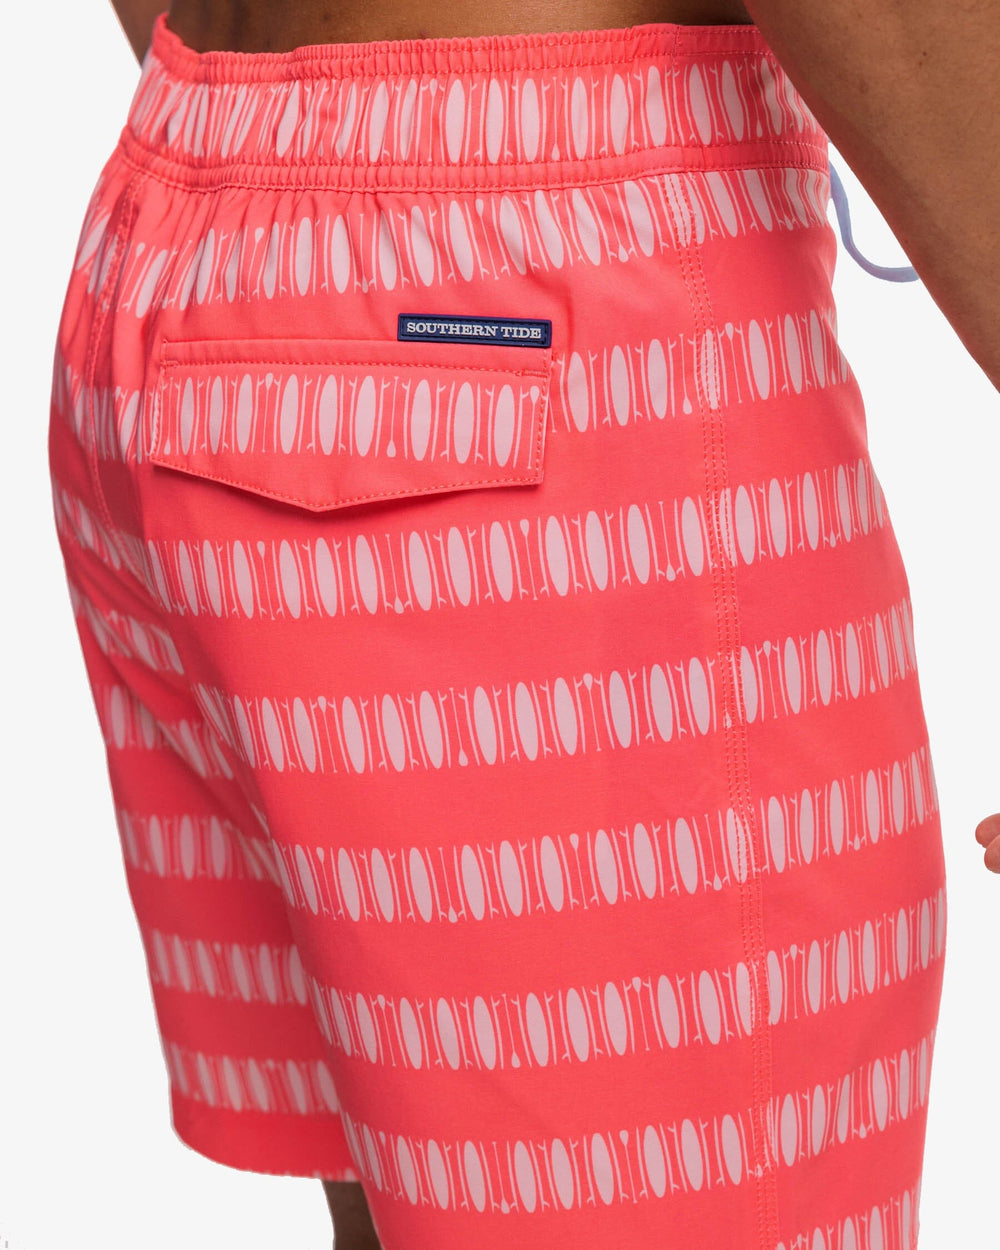 The detail view of the Southern Tide Paddlin Out Printed Swim Short by Southern Tide - Sunkist Coral